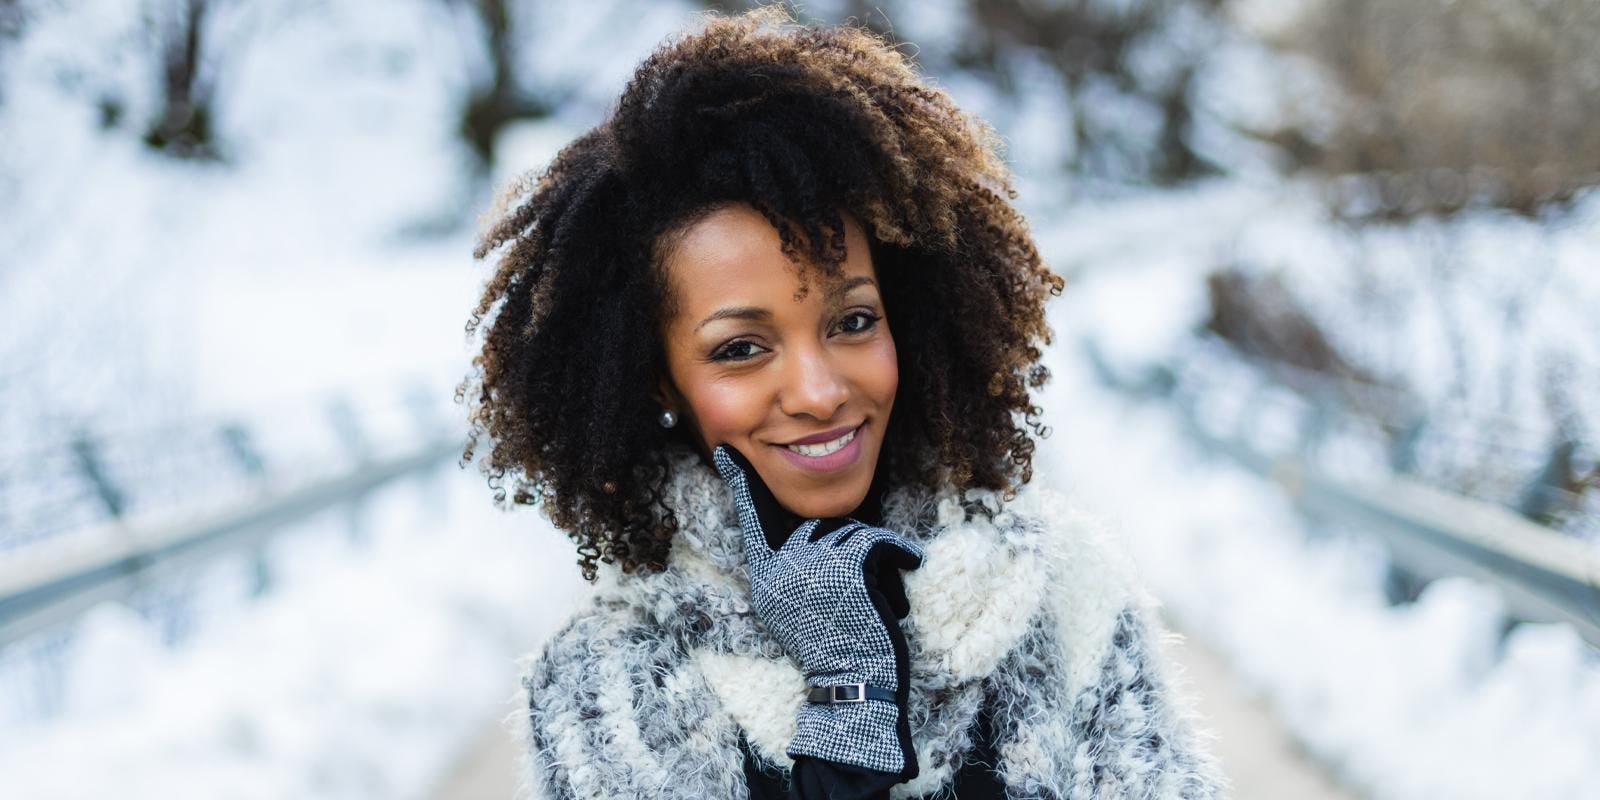 Winter hair color trends